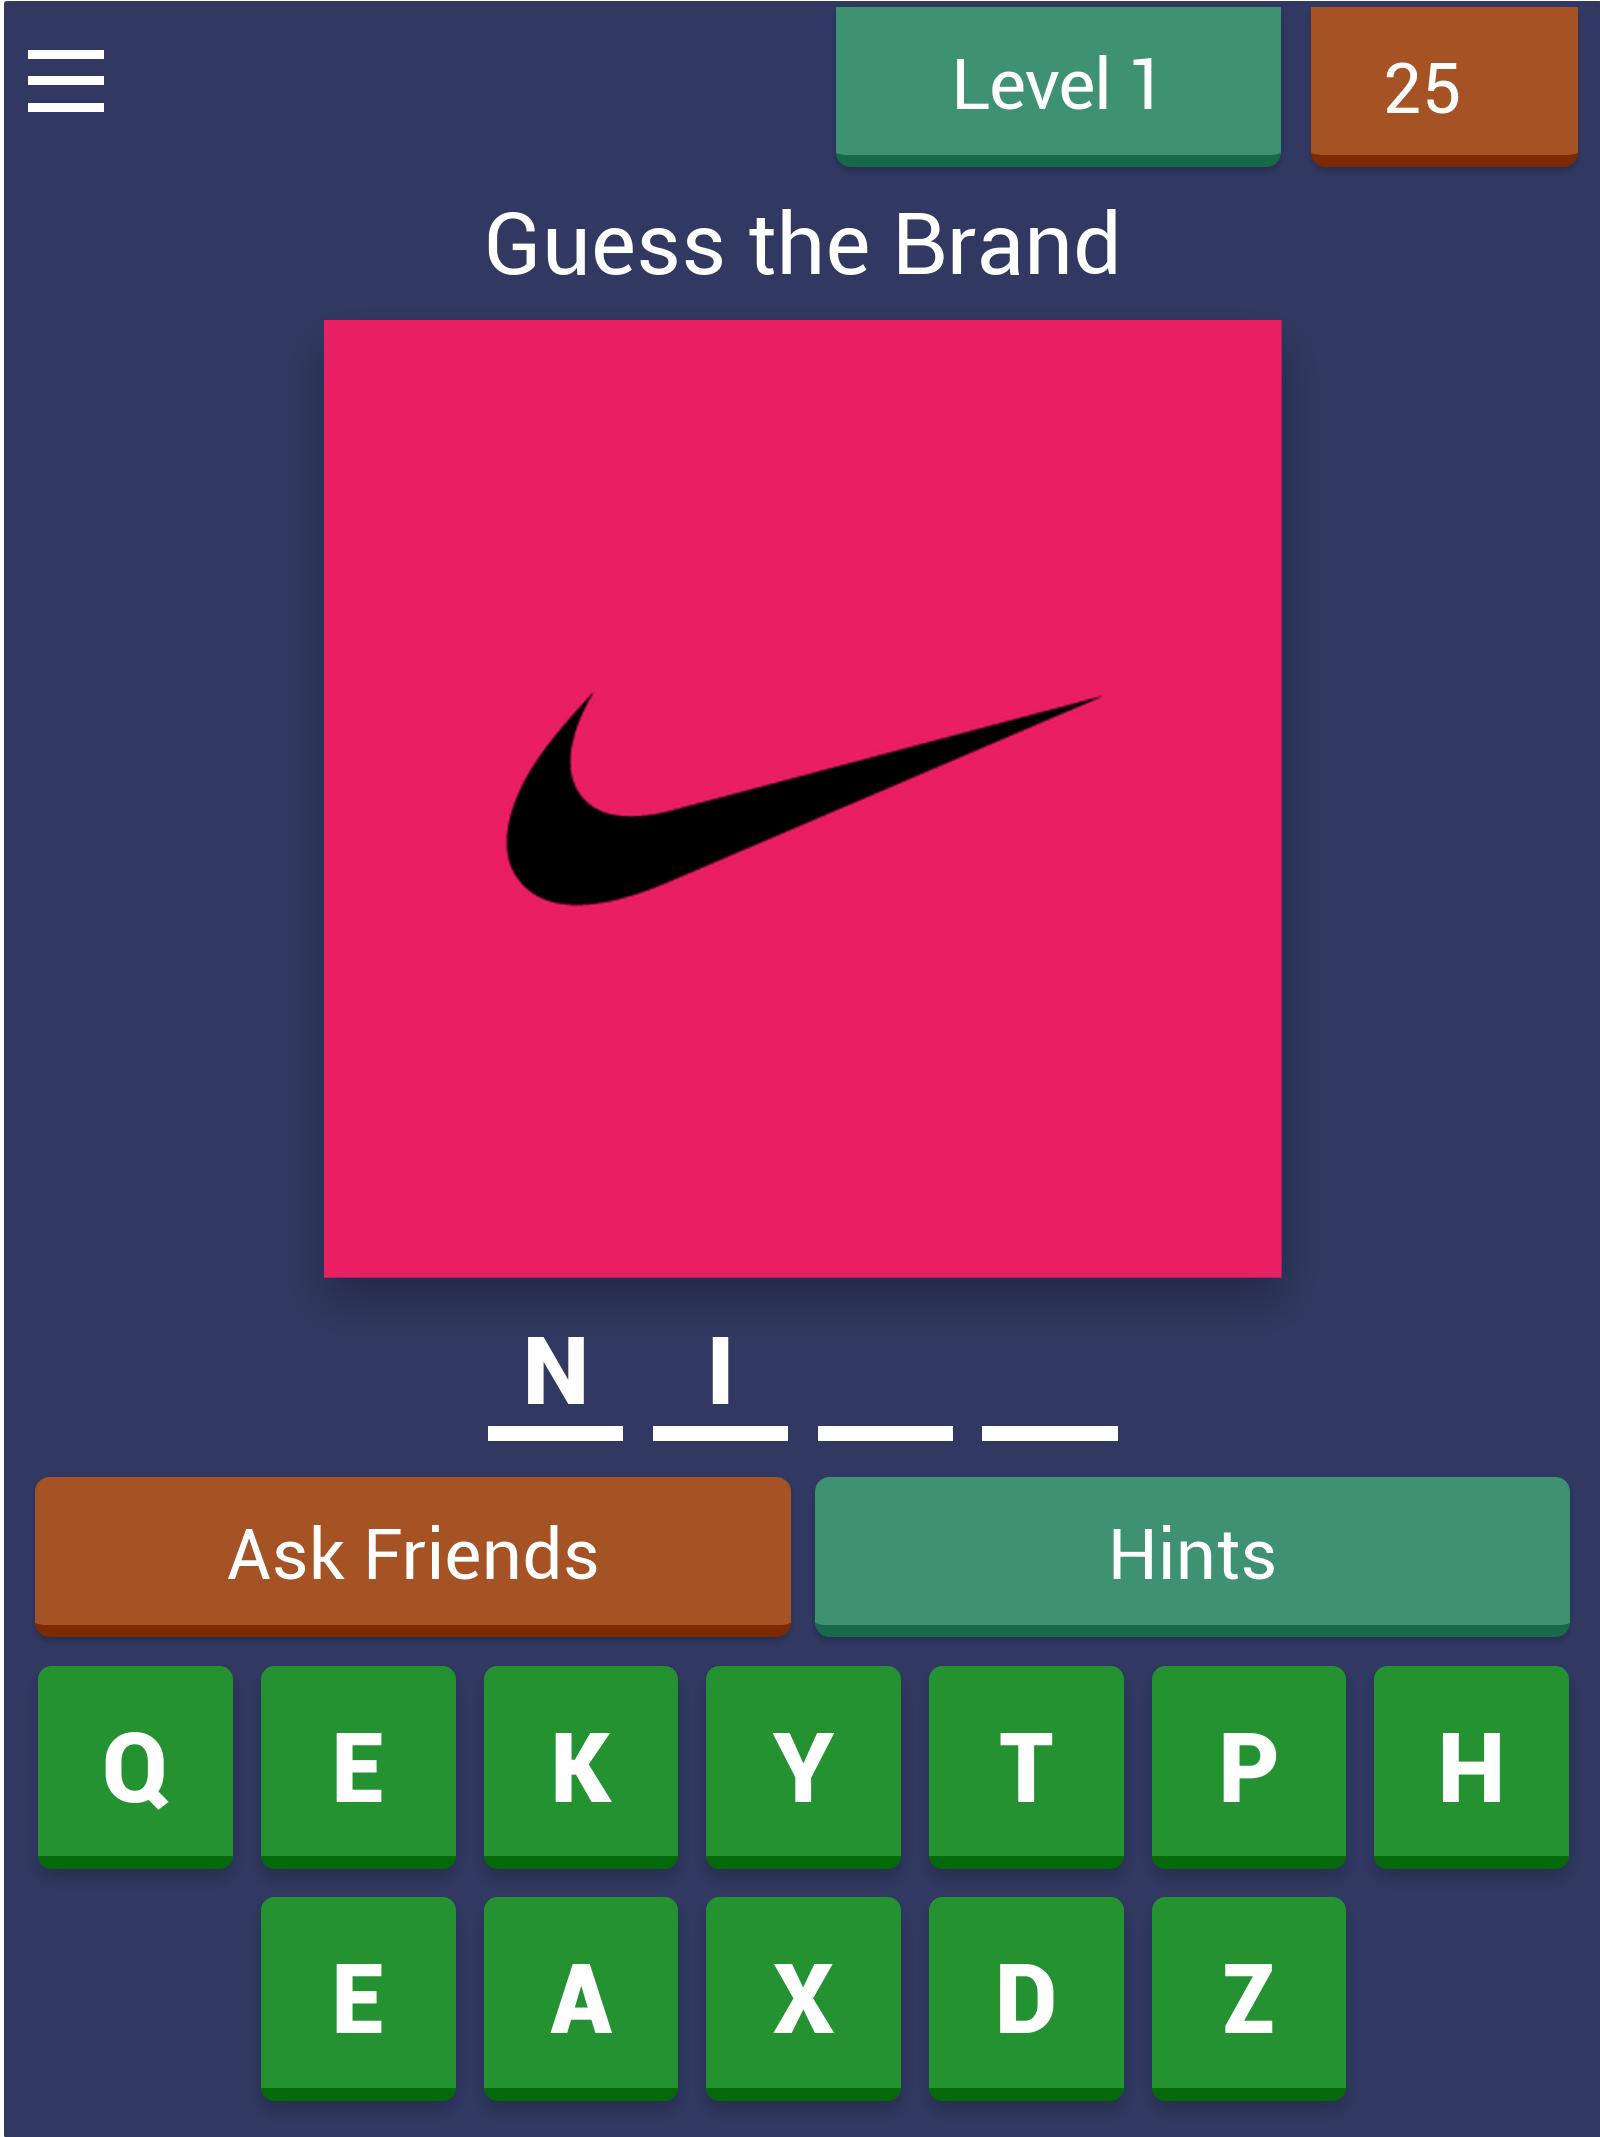 udvikle rutine tone Logo Quiz Game- Guess The Brand for Android - APK Download